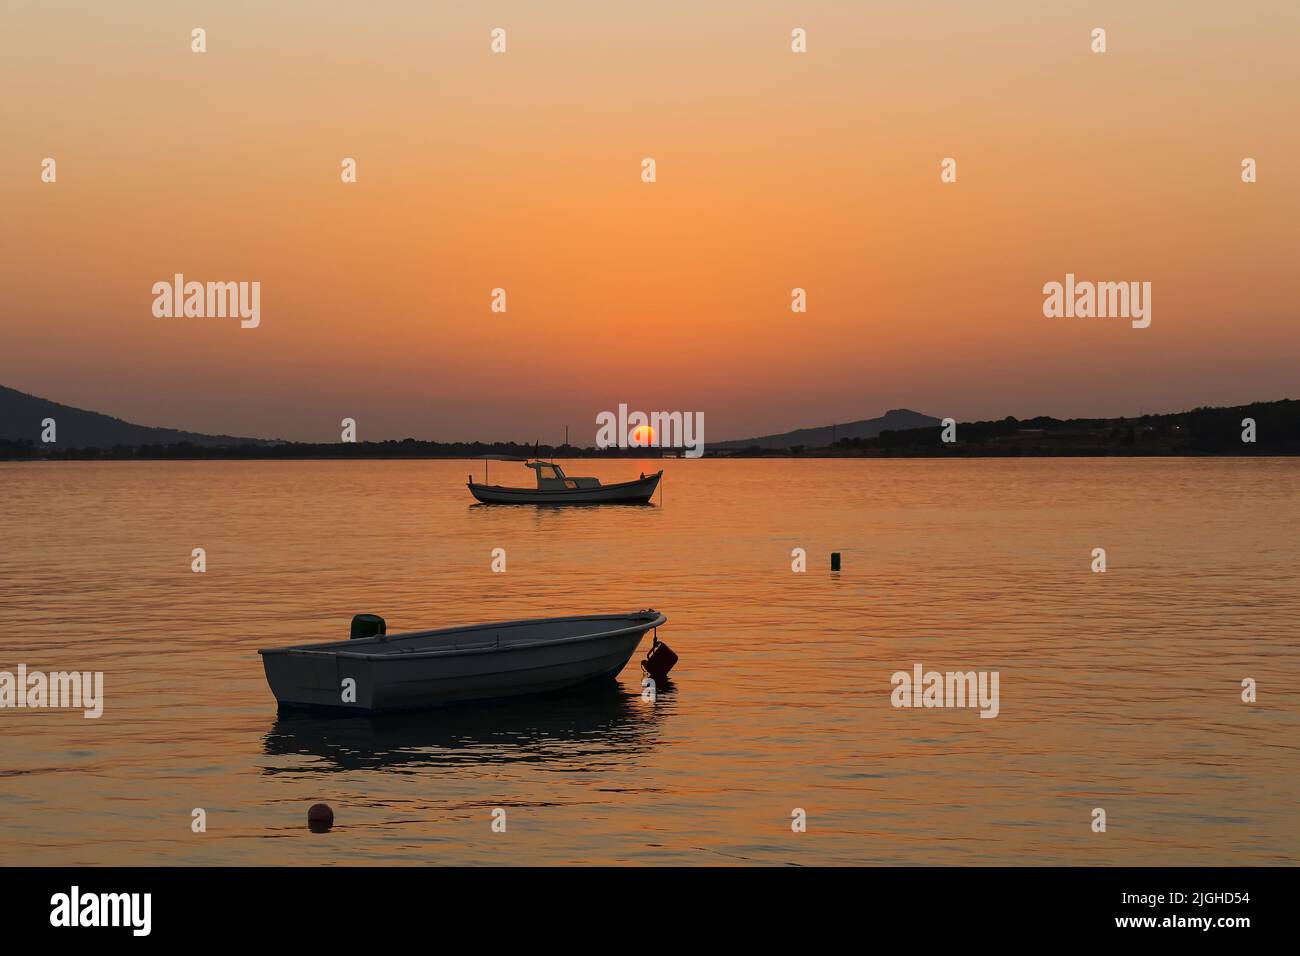 View of small, wooden fishing boats, Aegean sea and landscape at sunset captured in Ayvalik area of Turkey in summer. Beautiful scene. Stock Photo